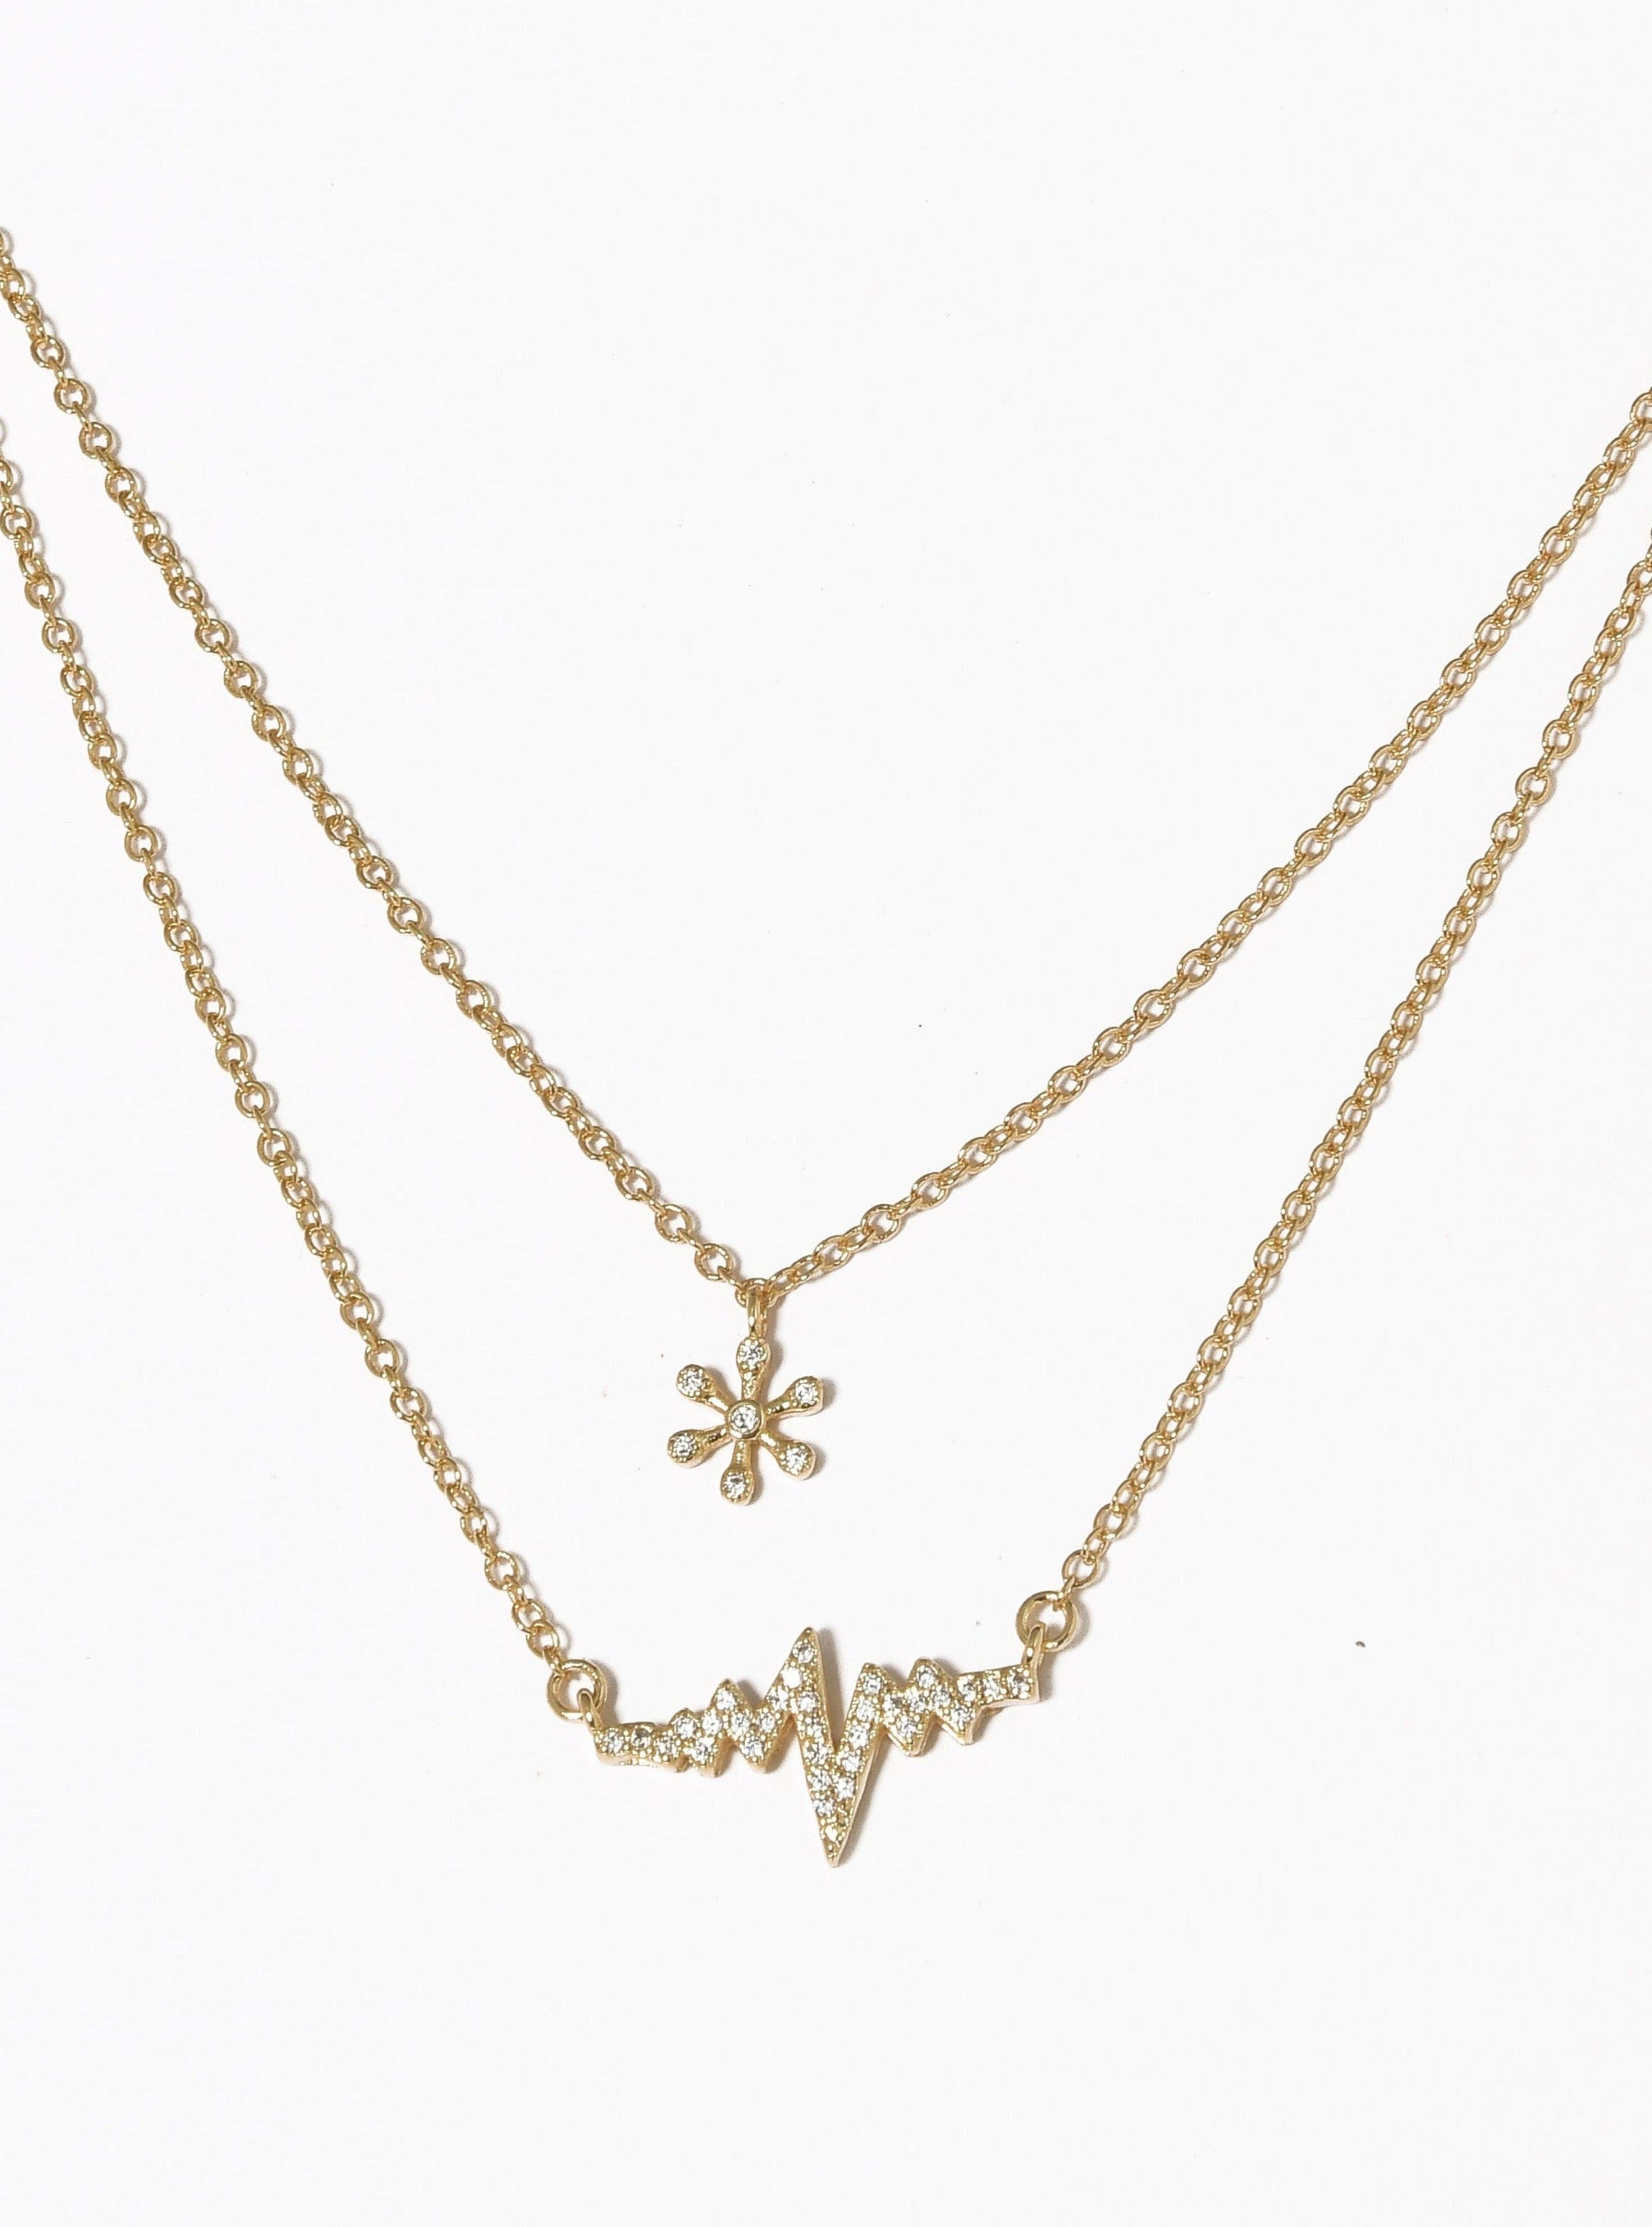 Necklaces | Silver + Gold Chains, Lariats + Chokers | Uncommon James